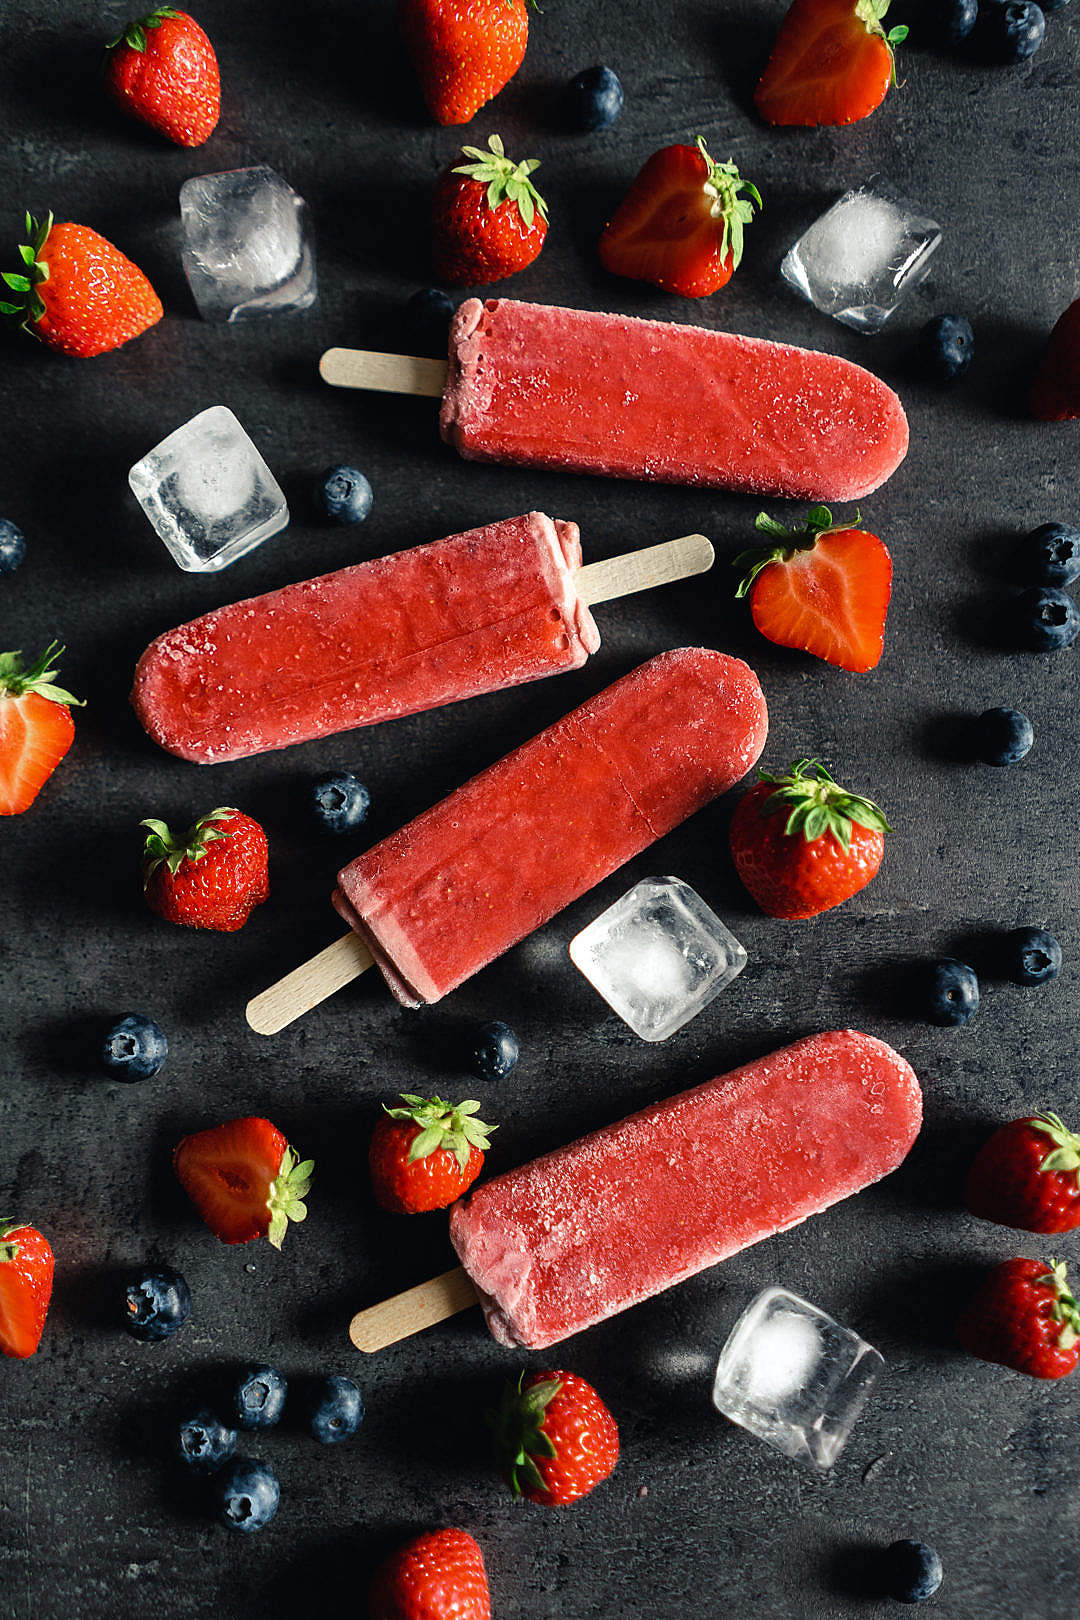 Strawberry Ice Lollies with Fresh Blueberries on Black Background